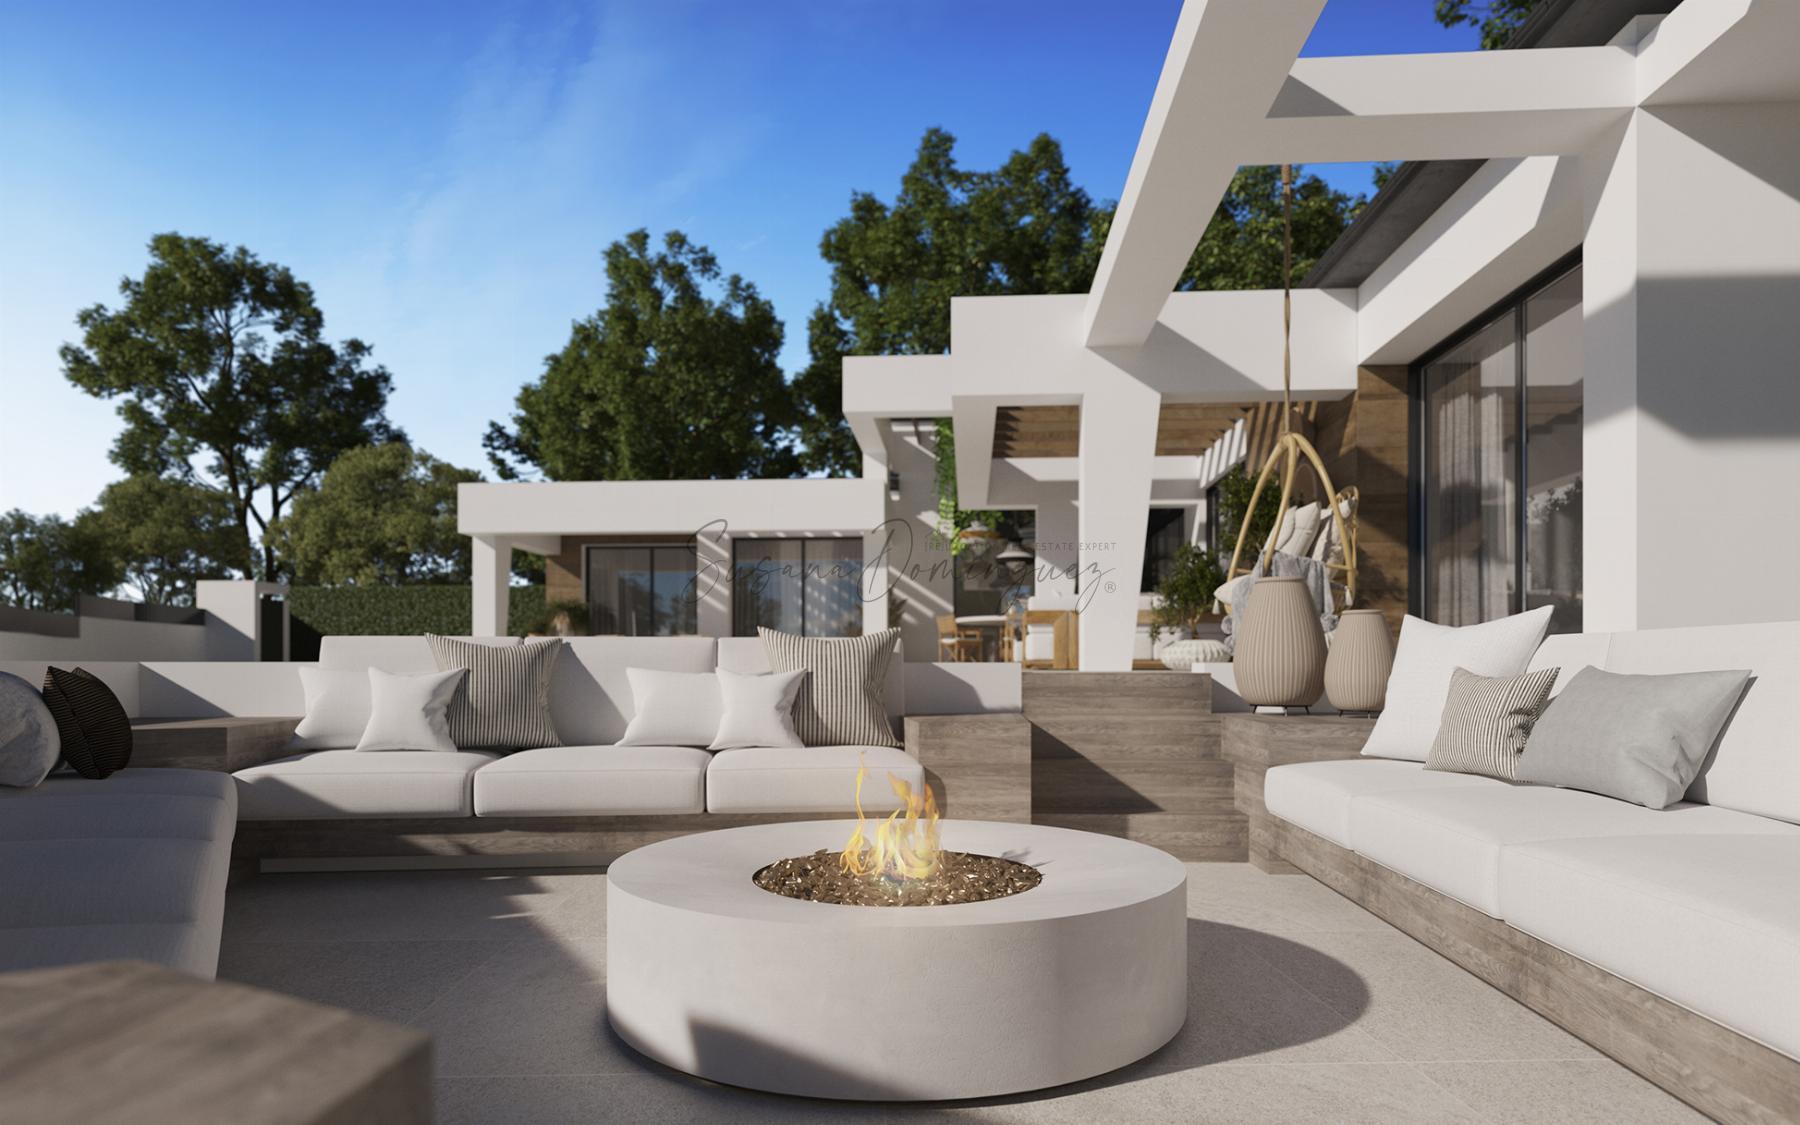 For sale of new build in Marbella